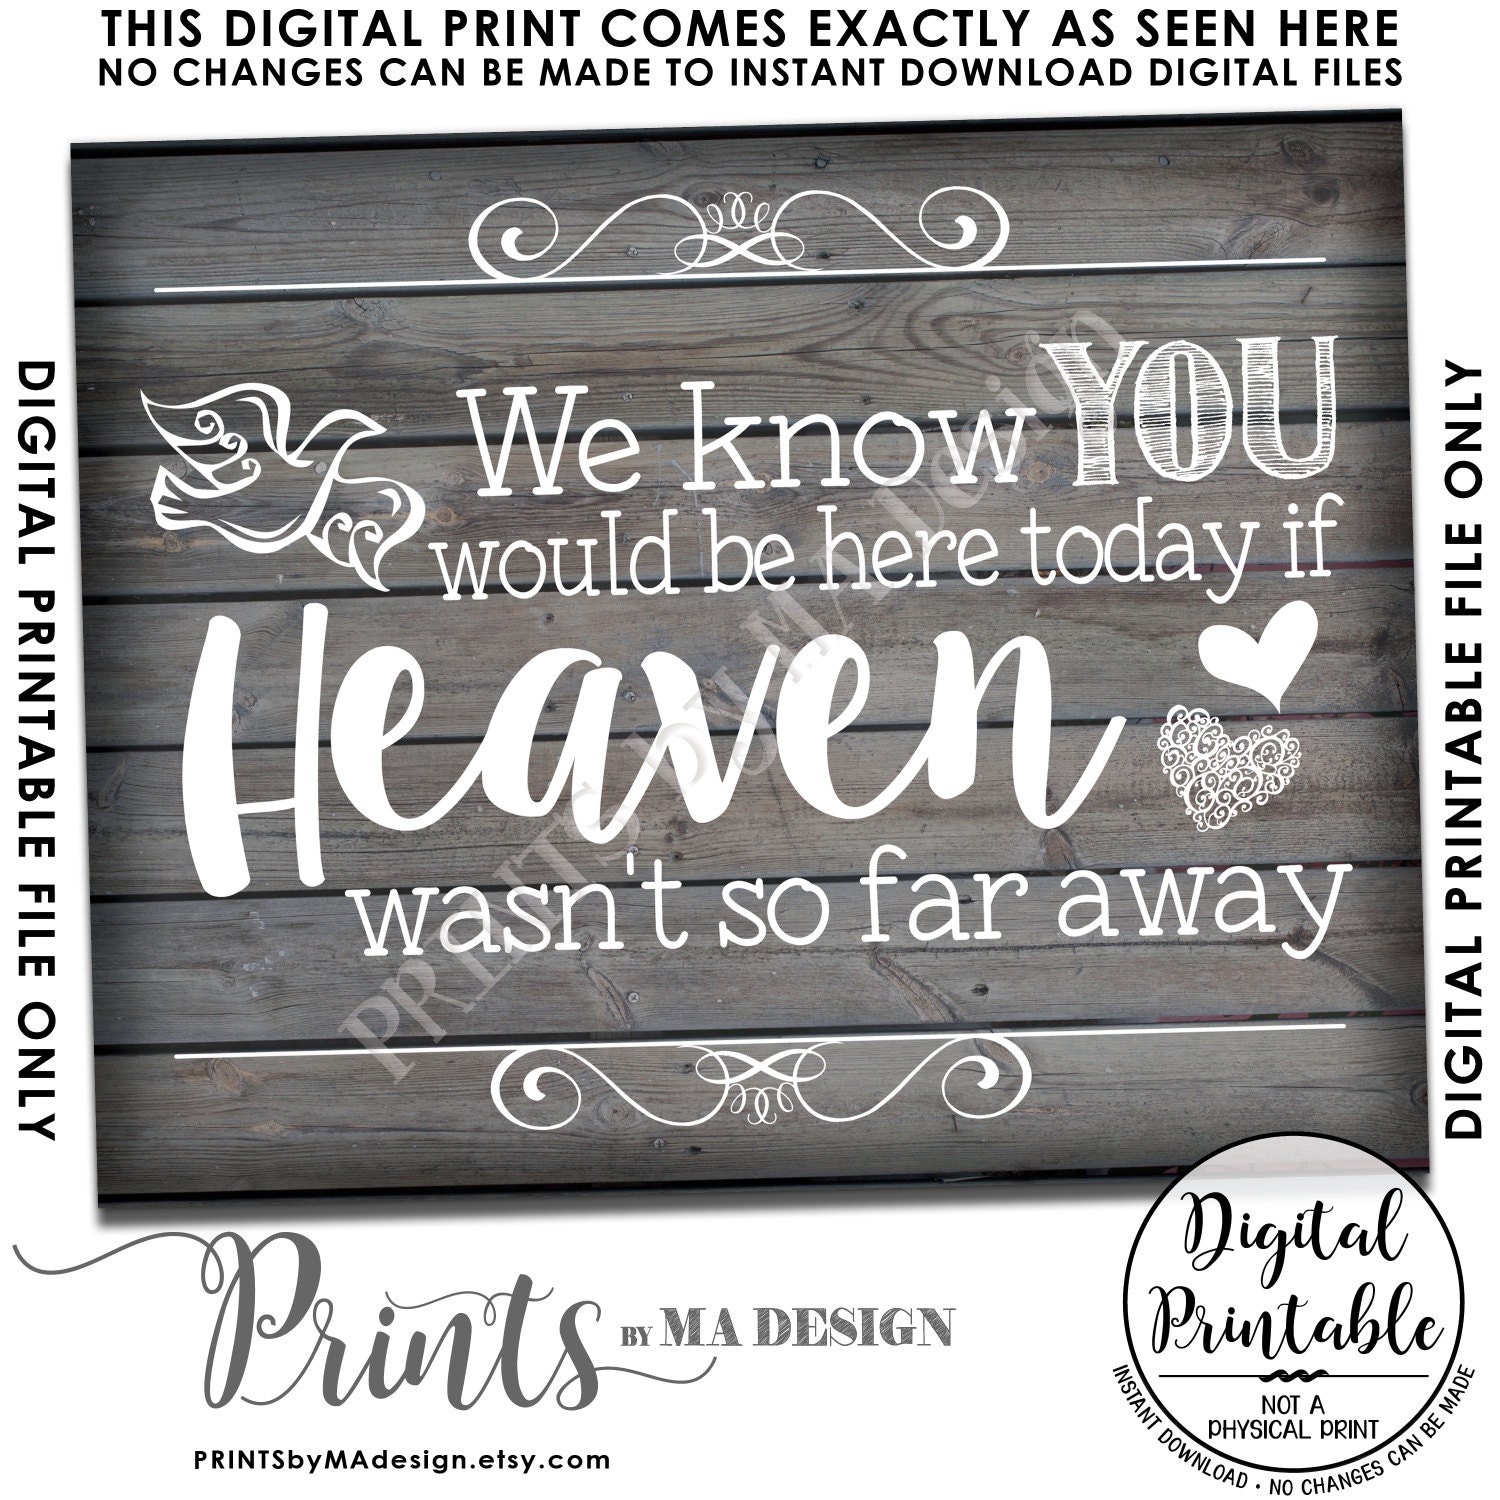 heaven-wedding-sign-we-know-you-would-be-here-today-if-heaven-wasn-t